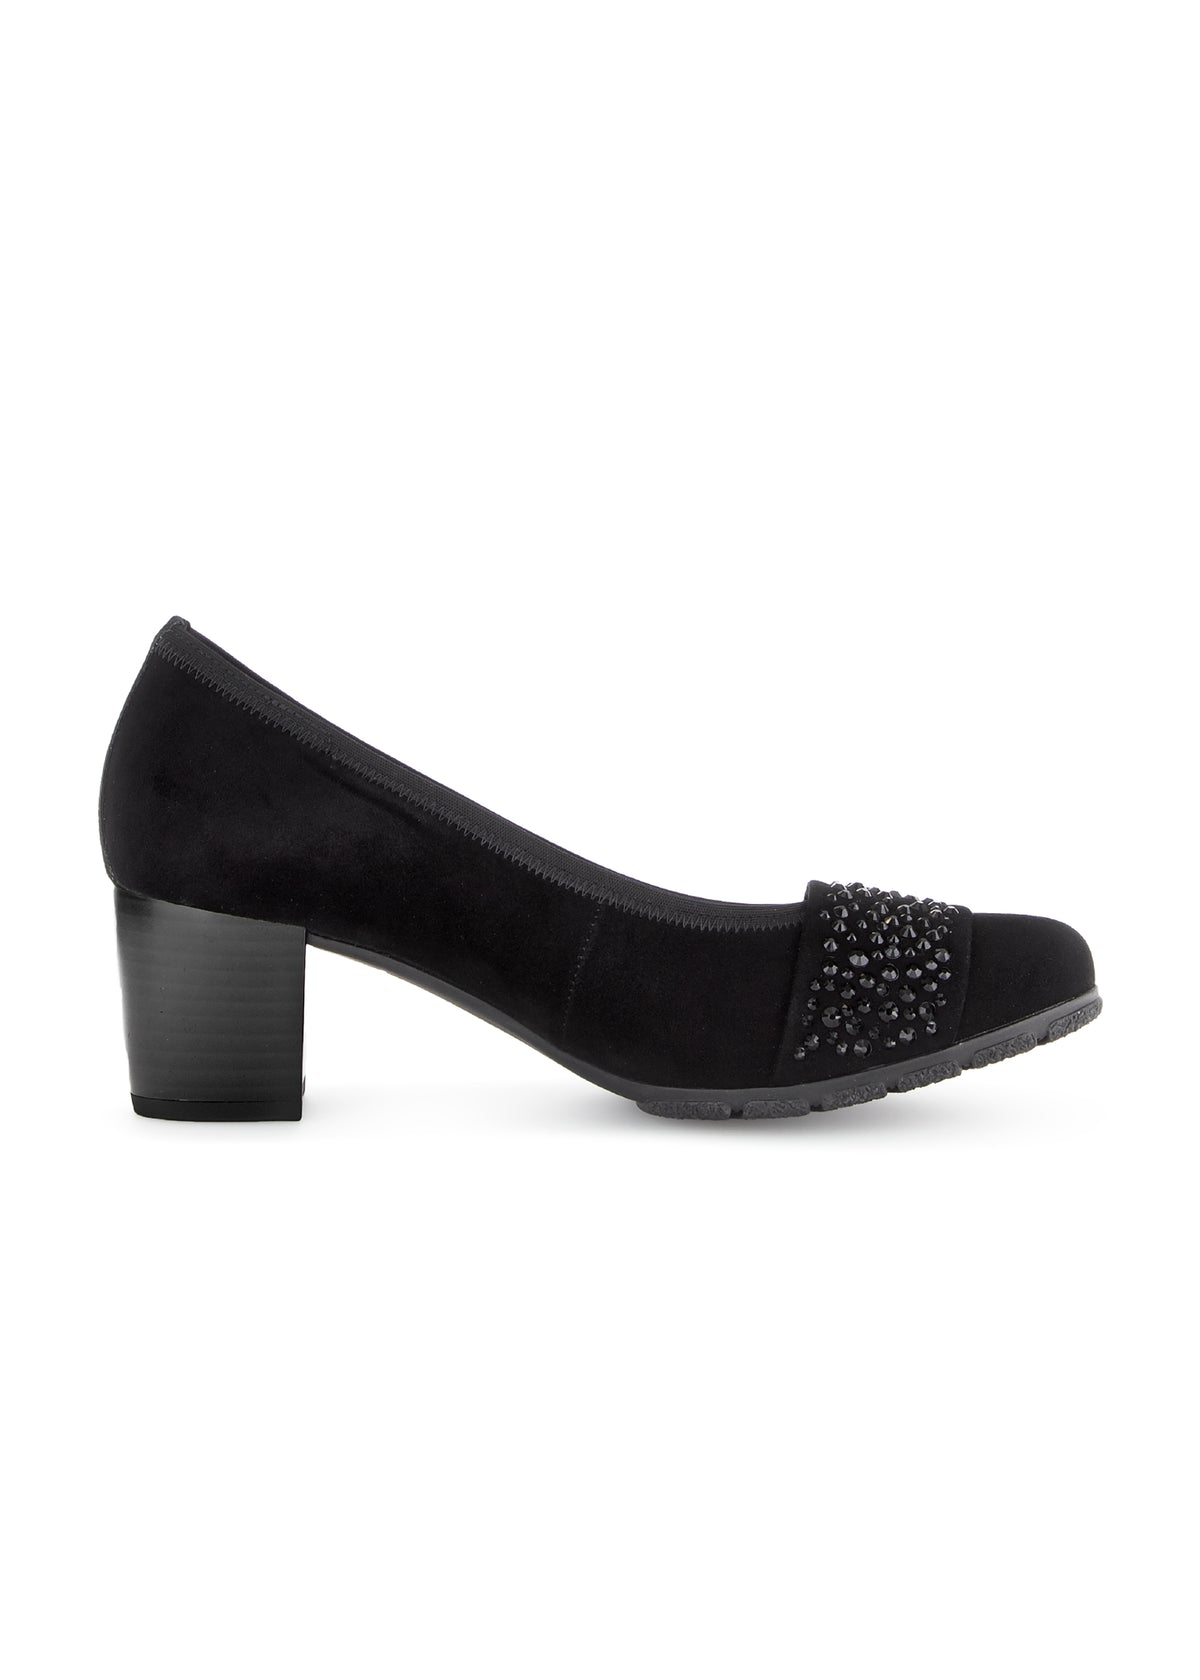 Open-toed shoes with studded heel - black leather